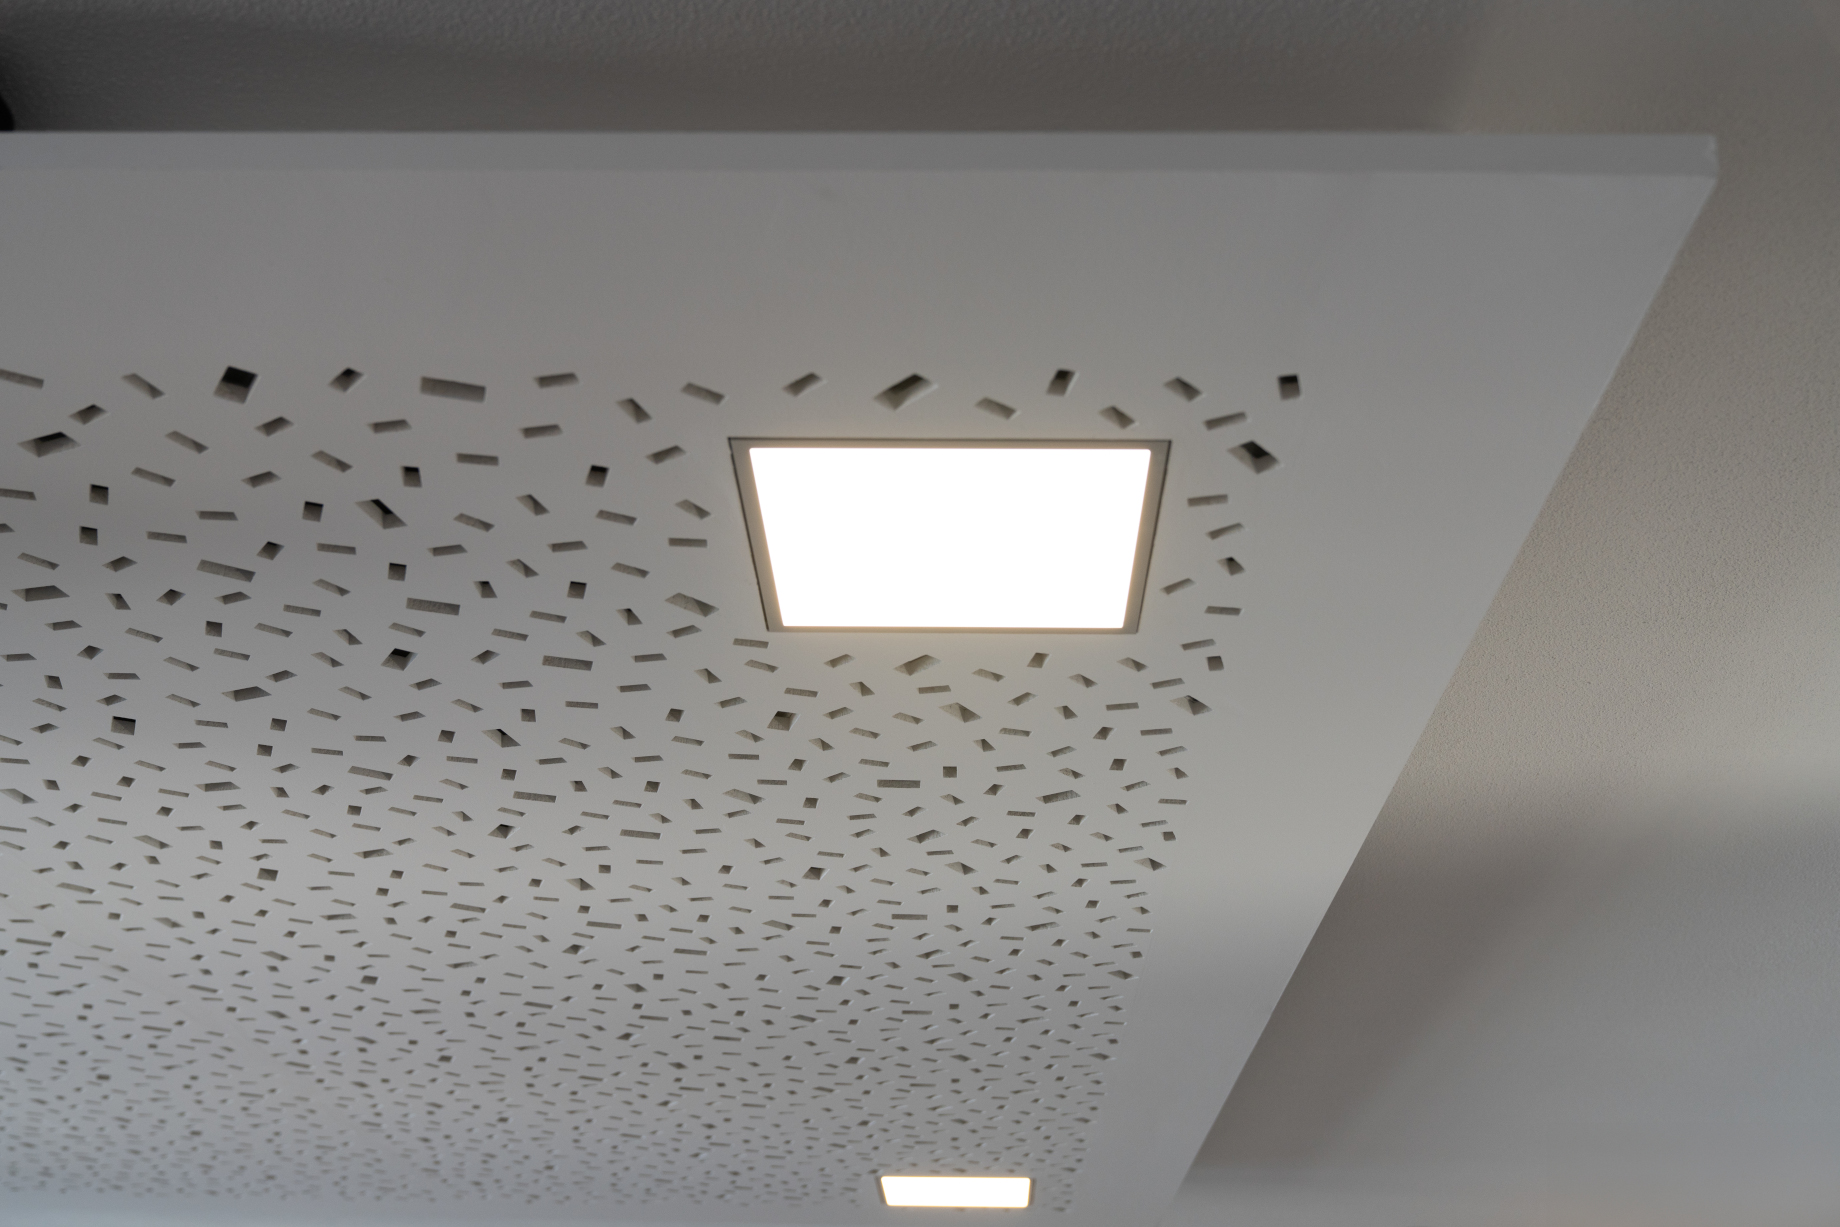 A white ceiling perforated with holes. The richter revilight is turned on, and installed in the ceiling